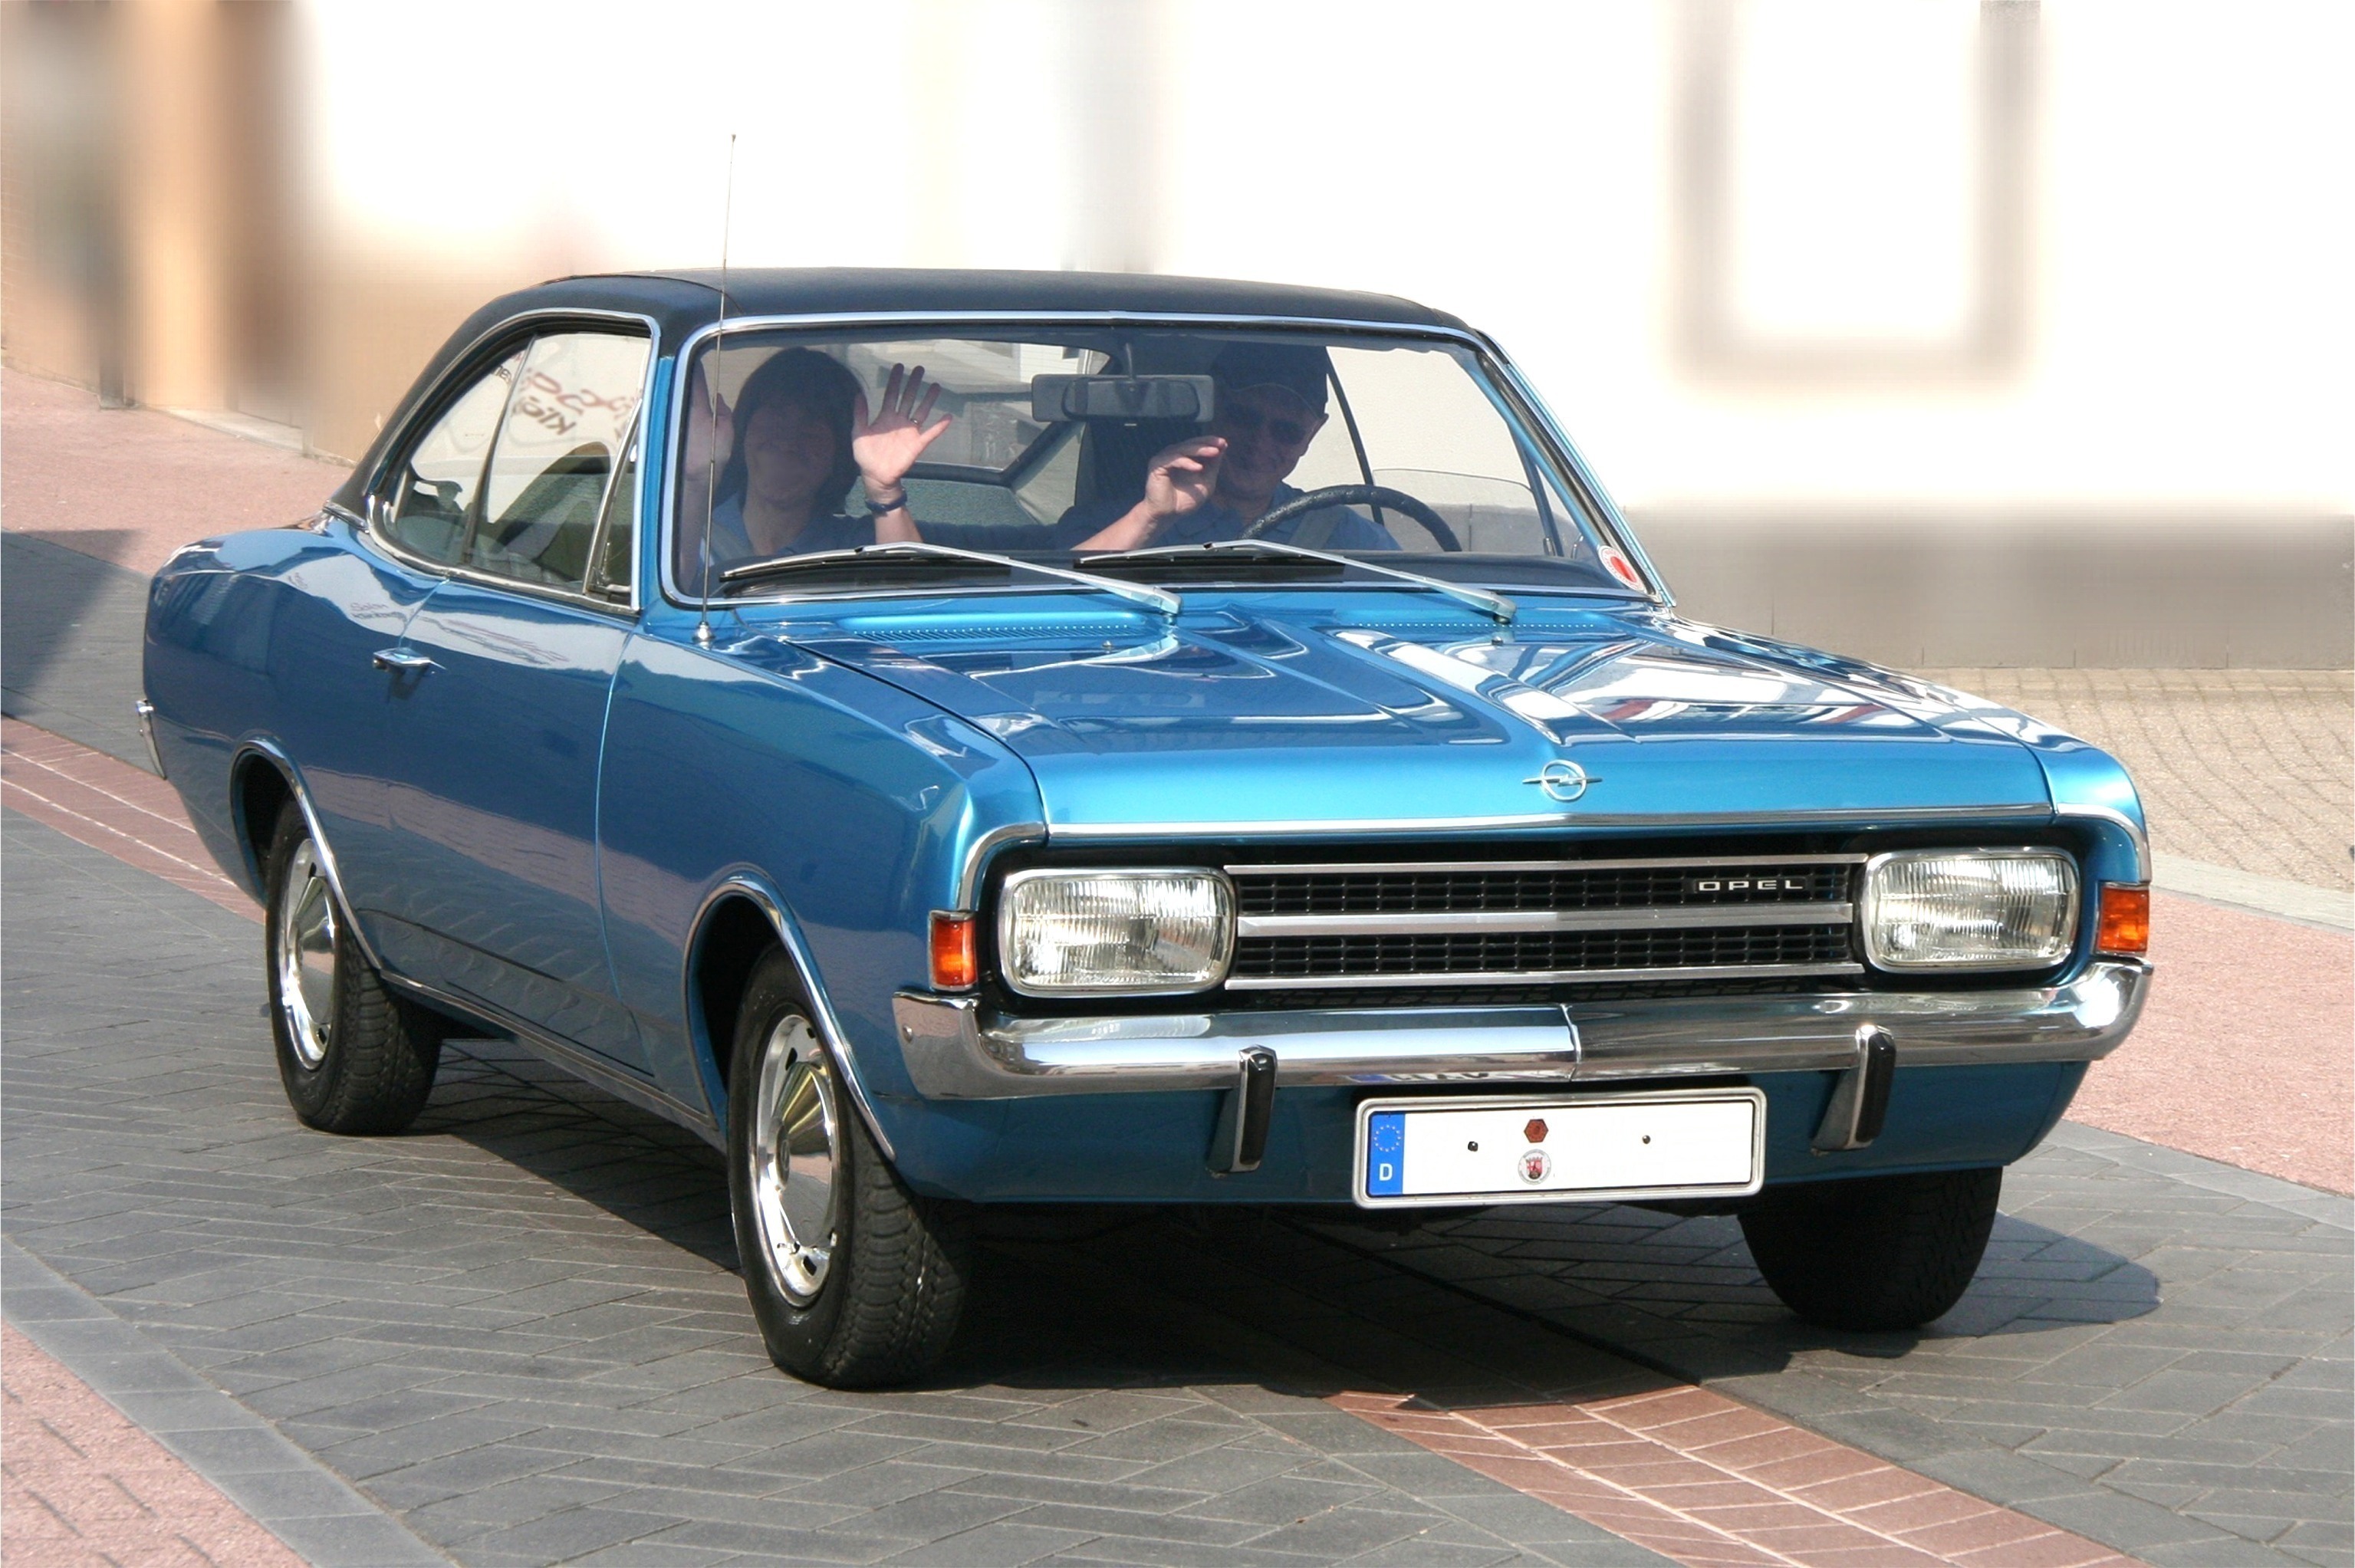 images of and not 60s coupe styles which were mass produced opel rekord